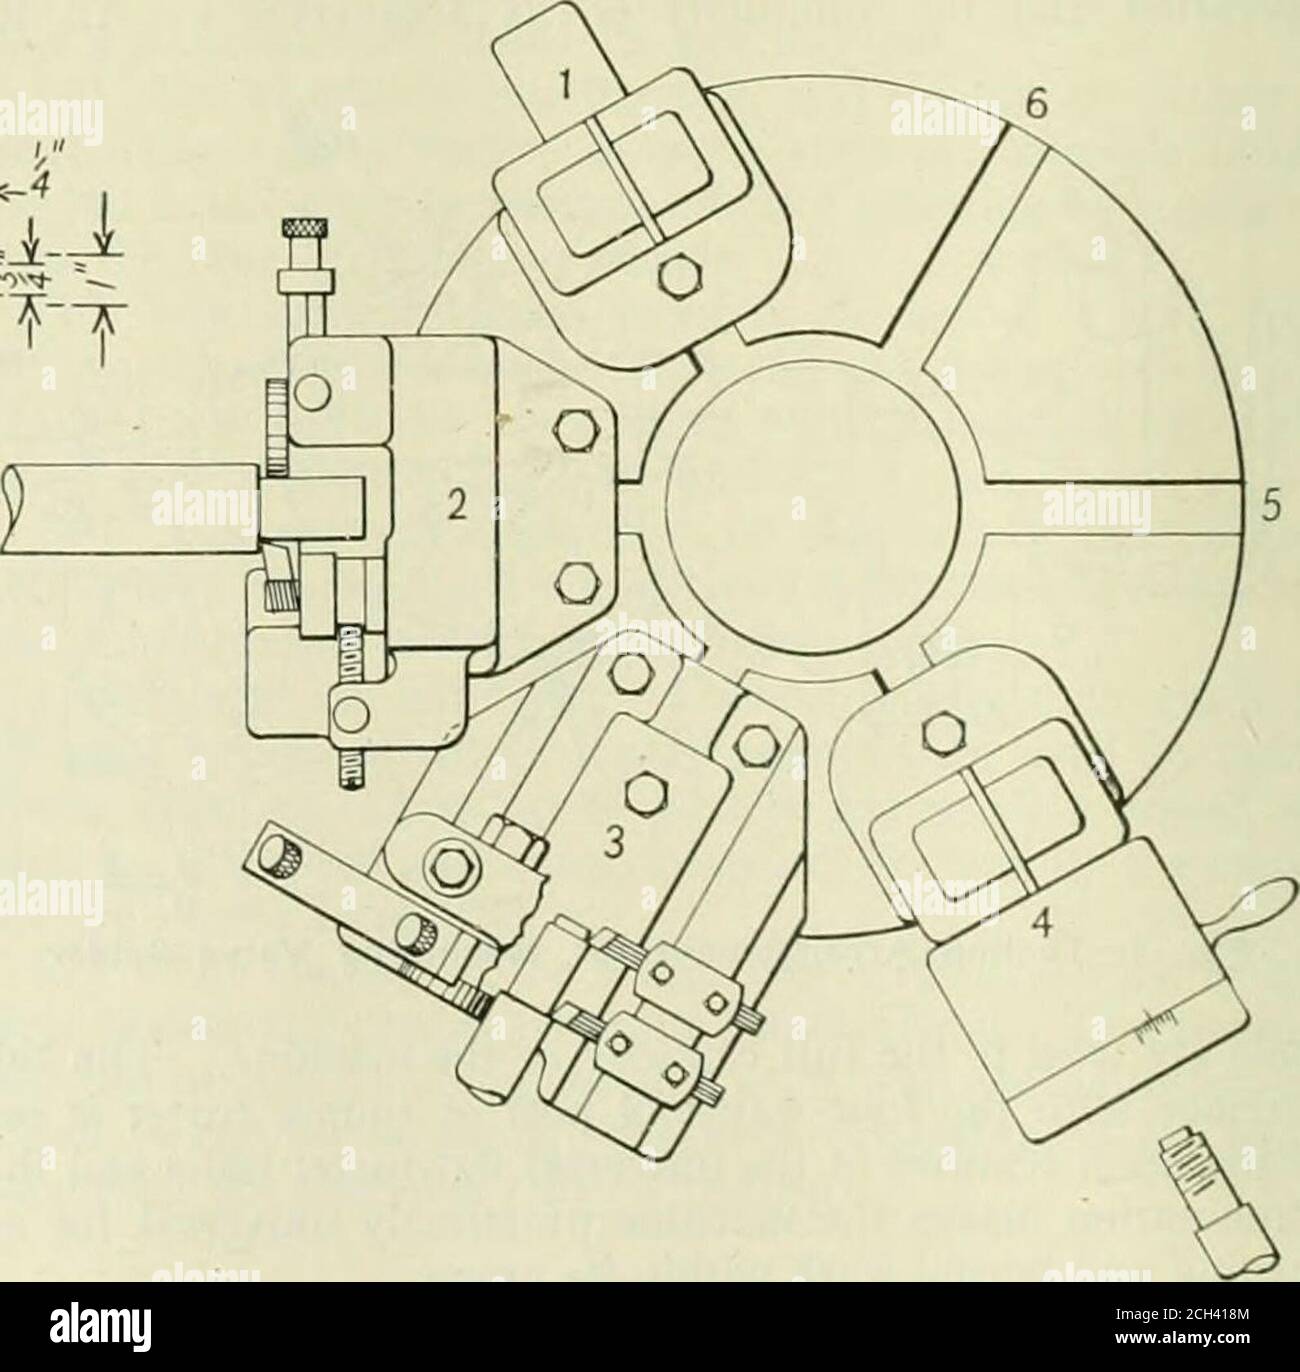 . Railway mechanical engineer .  *JL 5?. Fig. 5—Tooling of Universal Turret Lathe for First Operation on Emergency Valve Stem jaws cut out to conform with the work as shown in Fig. 3and the operations consist of finishing surfaces F, G andH. Surfaces F and G are rough faced and surface H isrough turned by cutter A held in the square turret. SurfaceH is finish turned and surfaces F and G are finish faced bycutter .1/ held in the square turret. The work is removed 3 7/16-in. boring bar at the fiist turret position. (2)Surfaces C and D are rough faced by cutters G and // andsurface B is rough tur Stock Photo